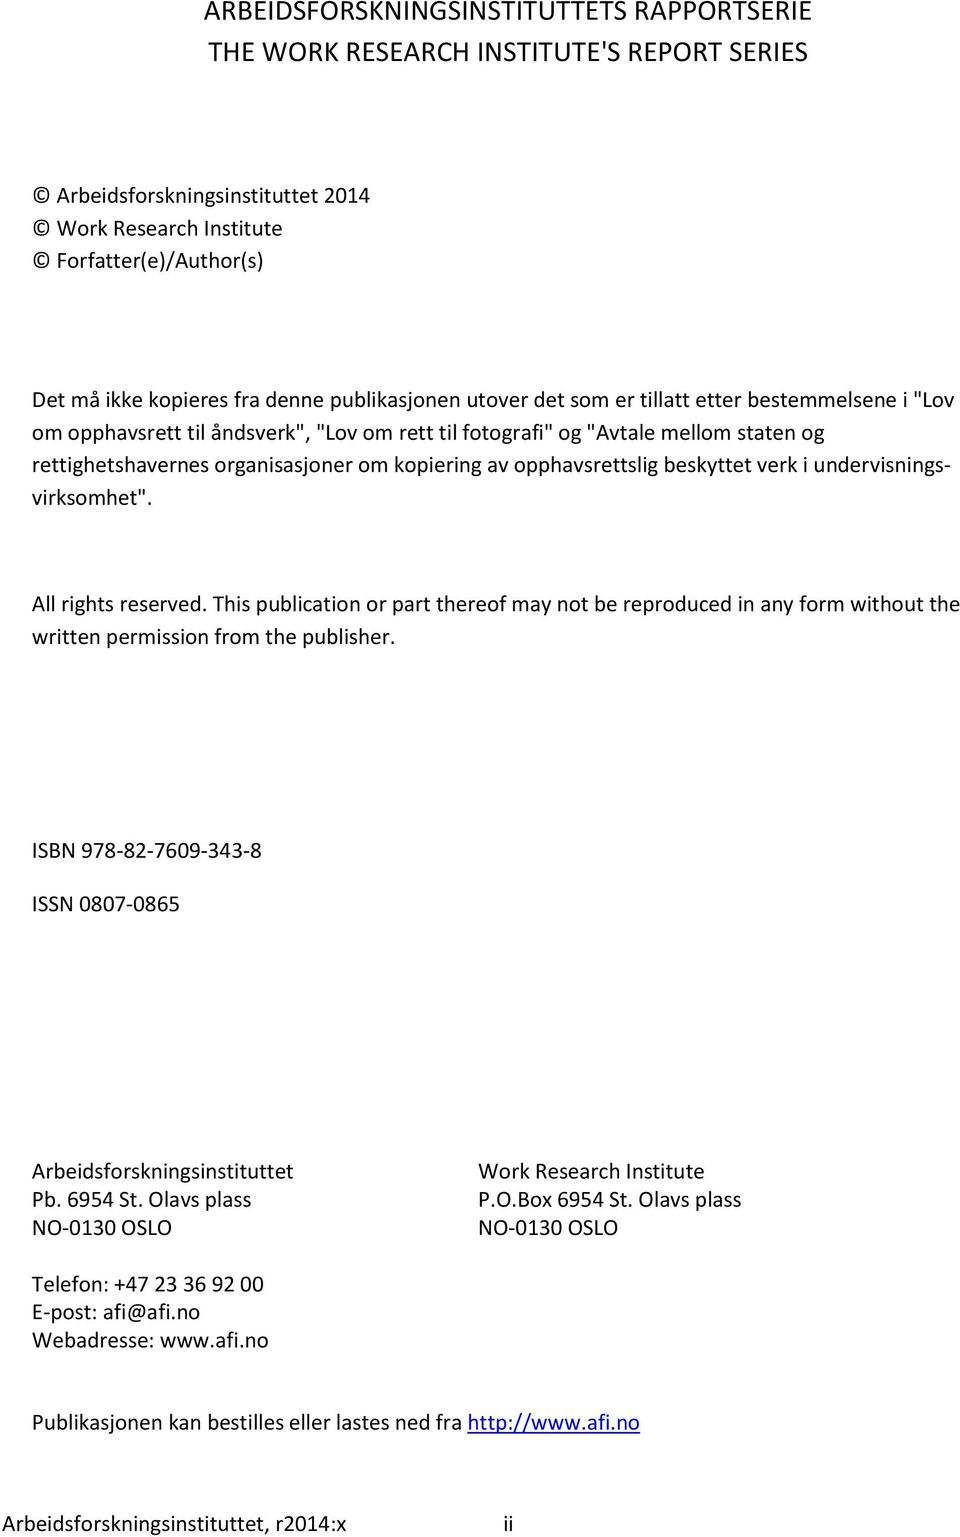 pphavsrettslig beskyttet verk i undervisningsvirksmhet". All rights reserved. This publicatin r part theref may nt be reprduced in any frm withut the written permissin frm the publisher.